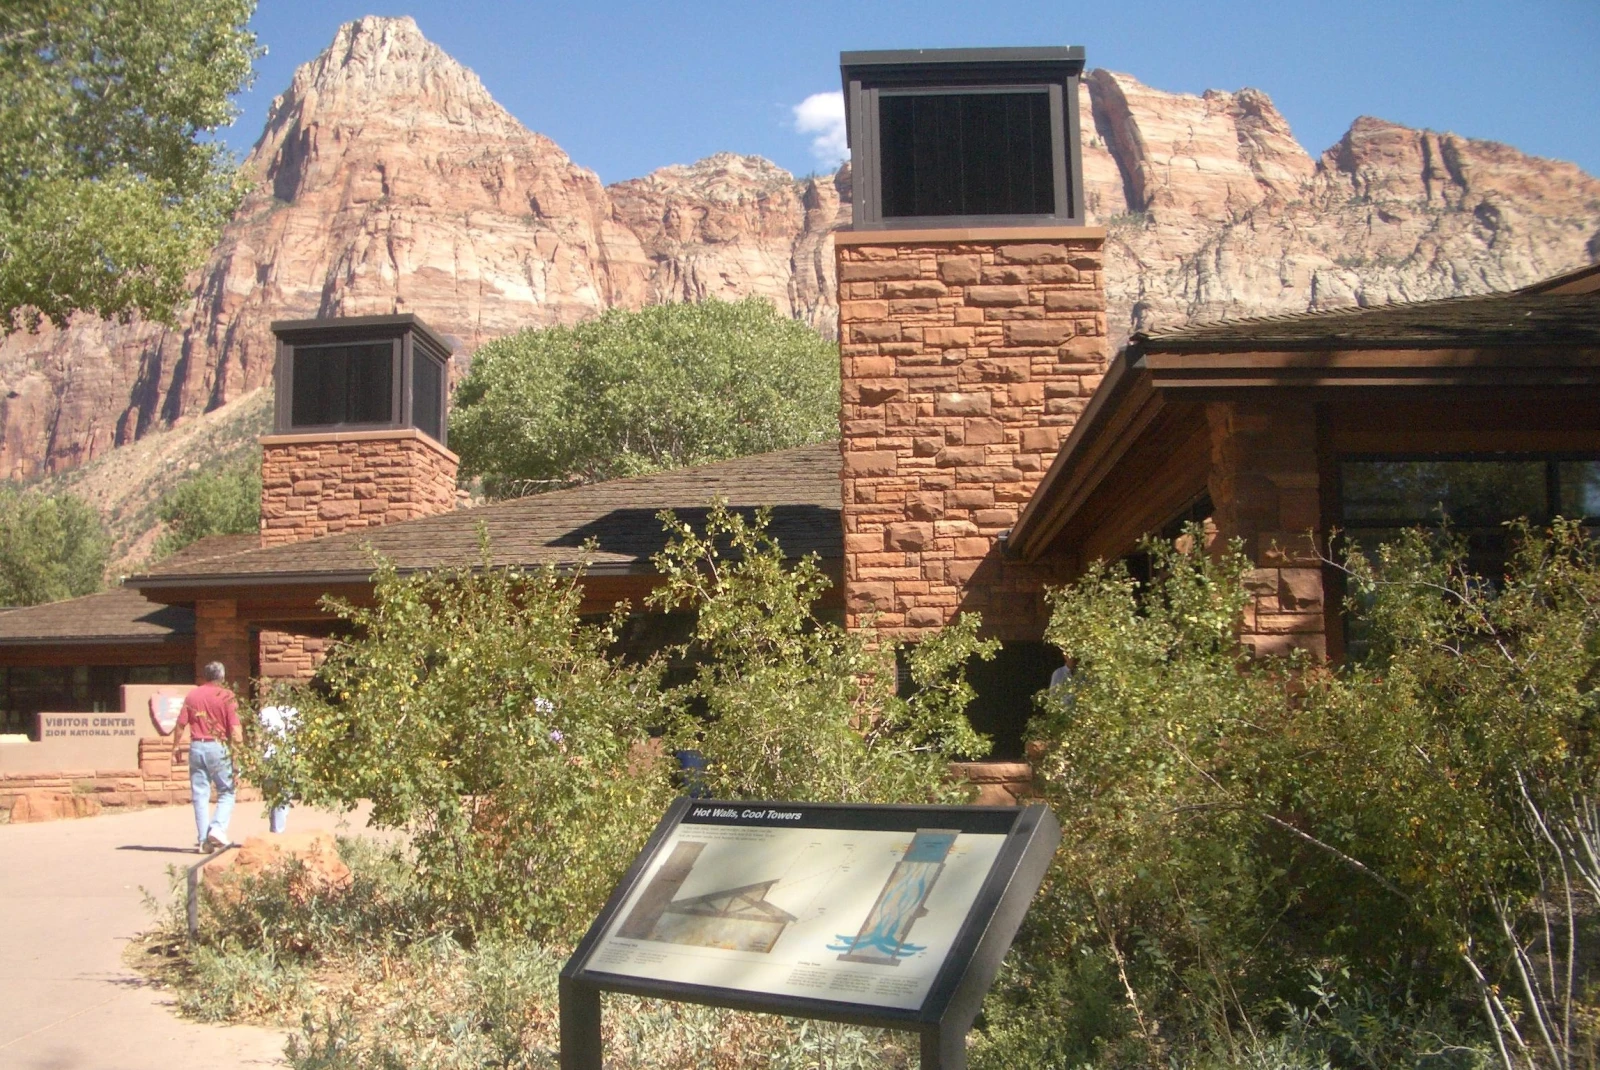 Visitor center in Zion.